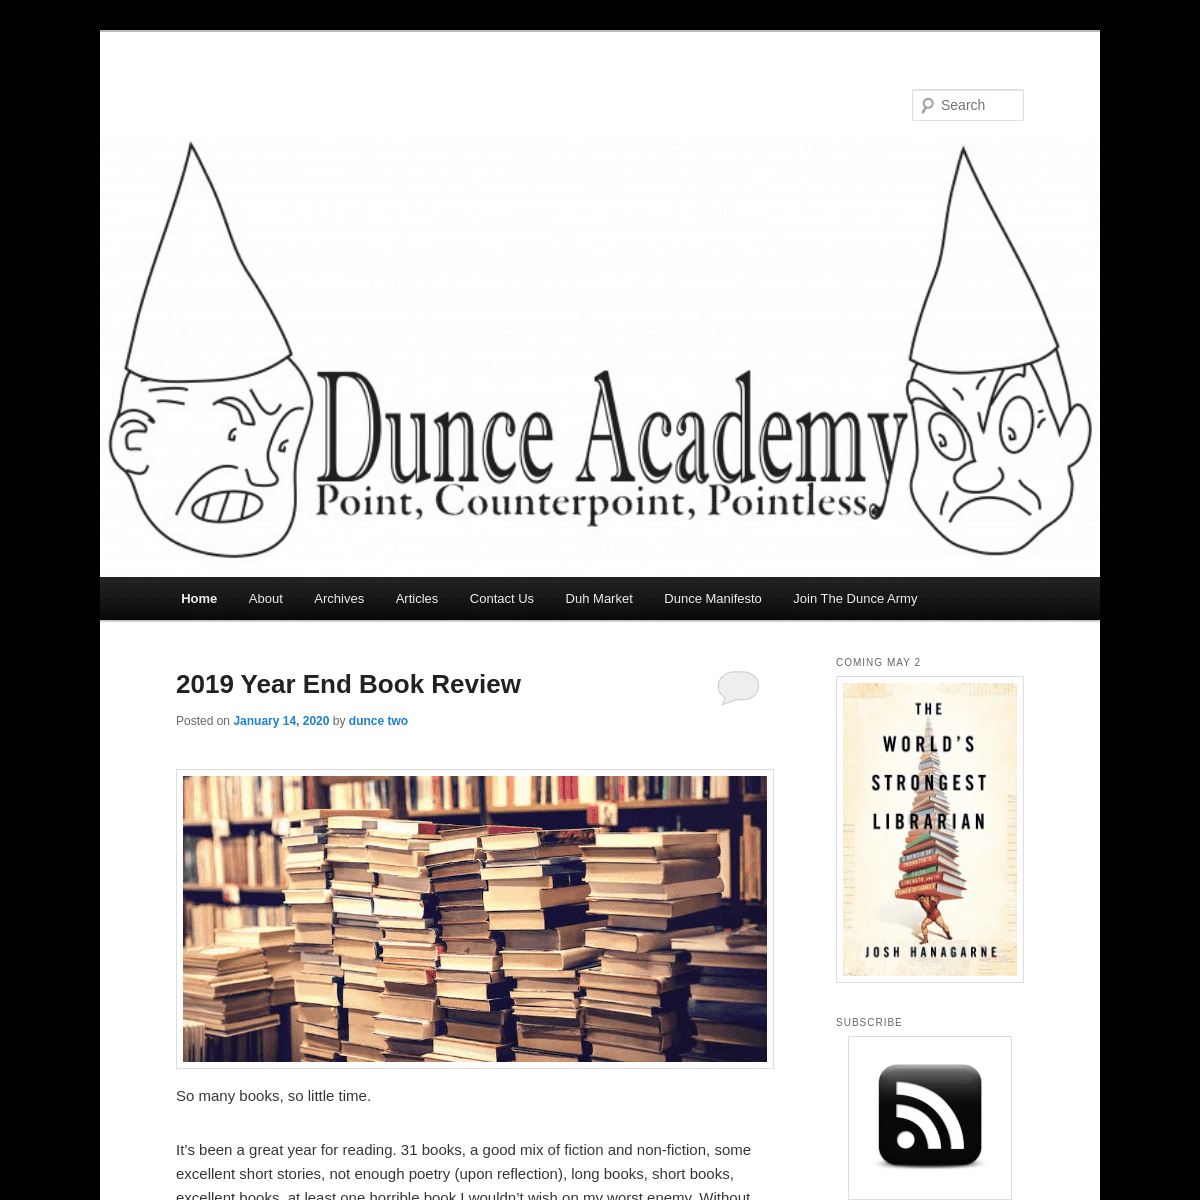 A complete backup of dunceacademy.com